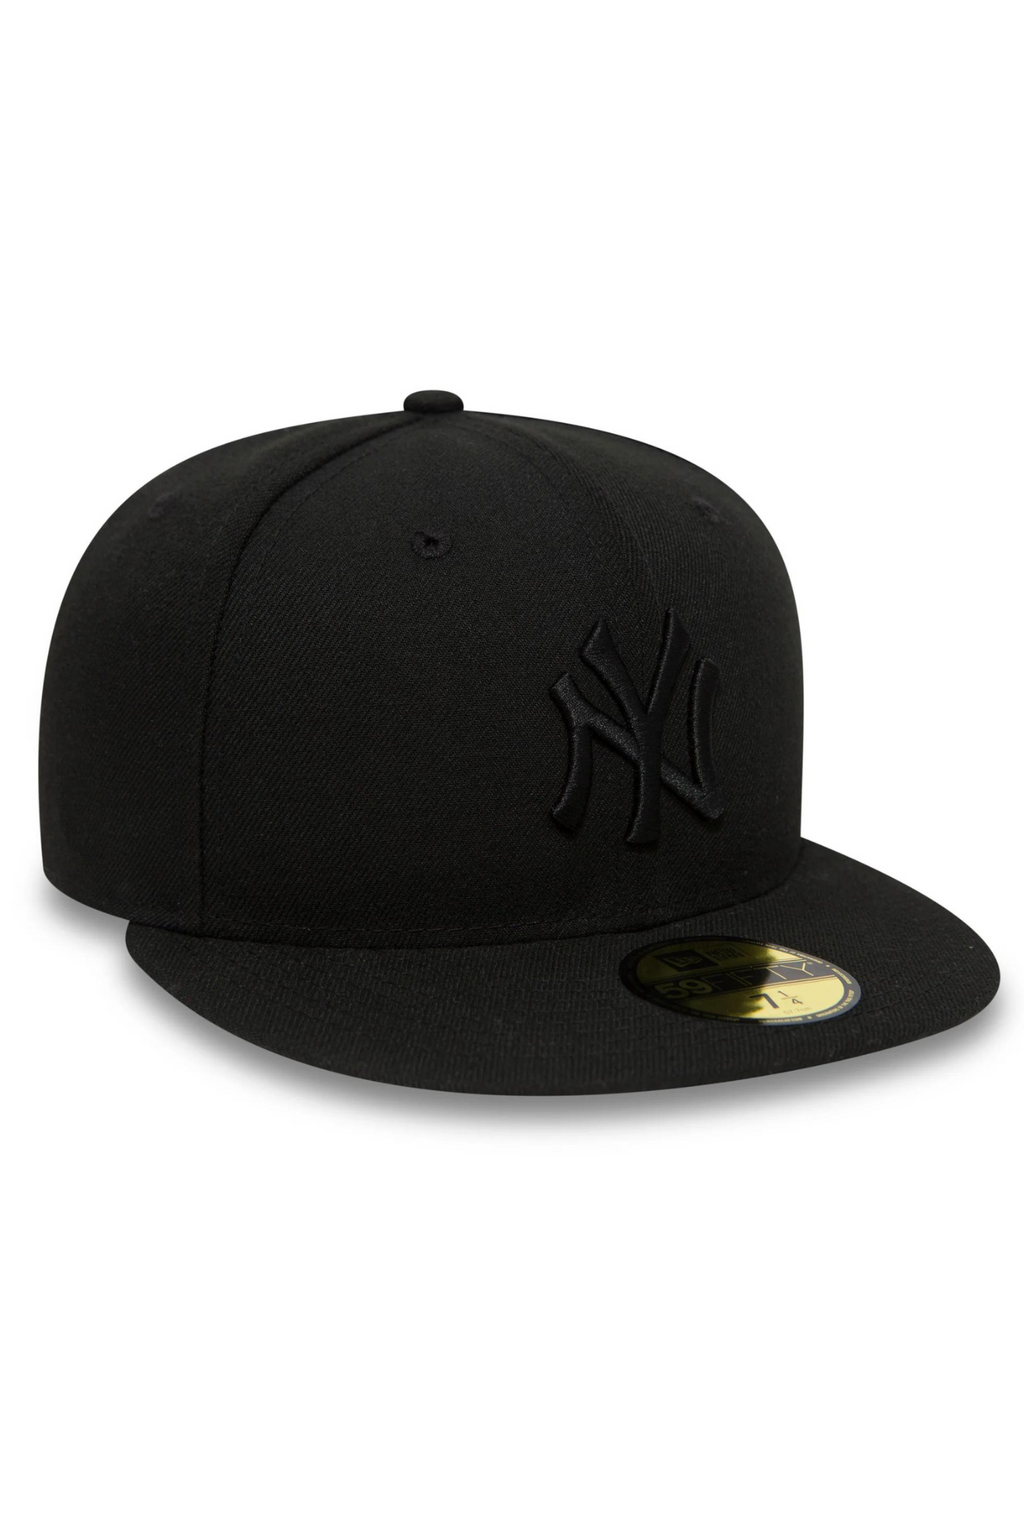 New Era New York Yankees Essential 59FIFTY Fitted Cap Black/ Black